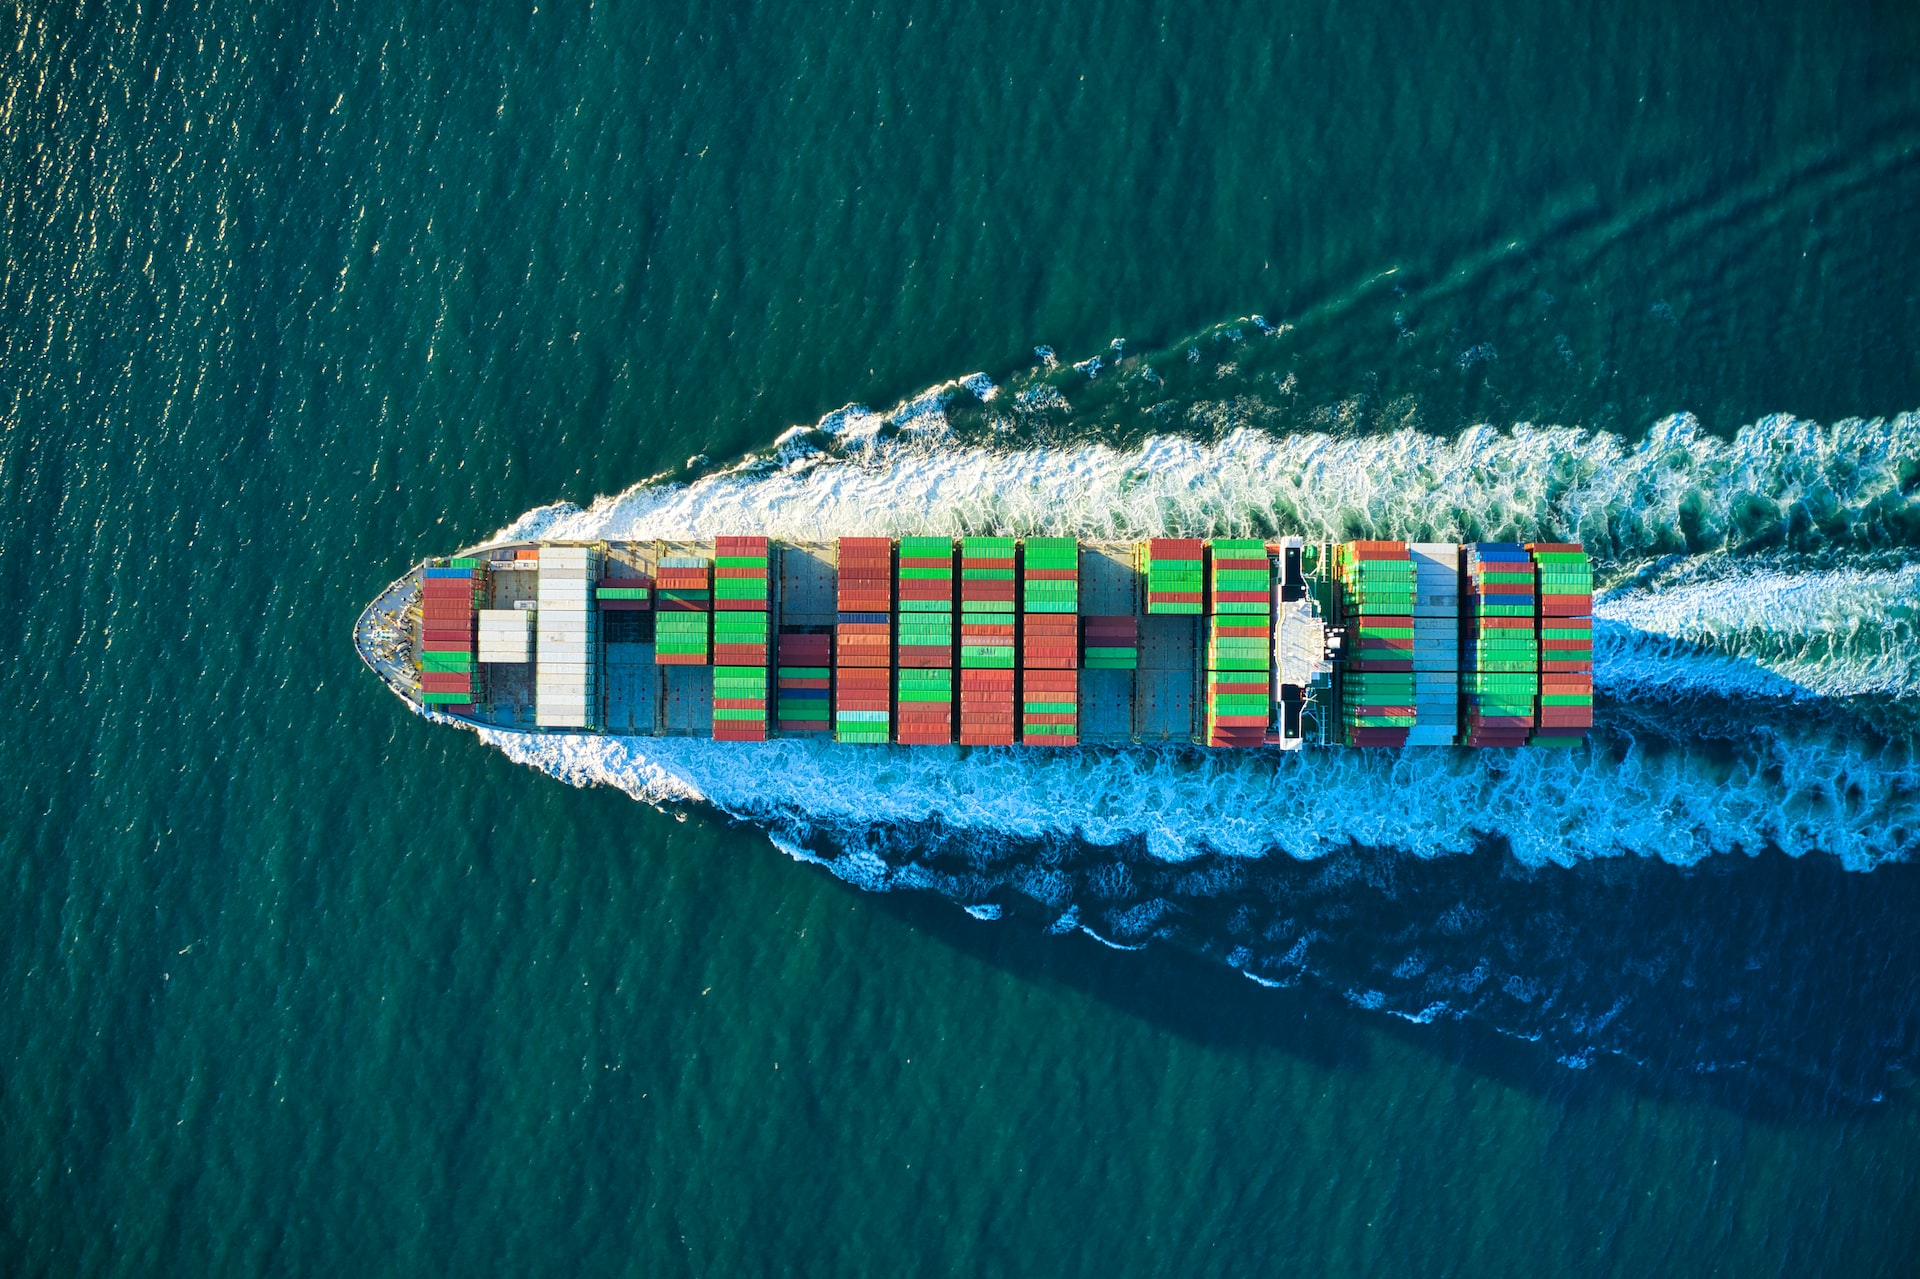 How to Protect Your Cargo from Cyber Attacks in 2023